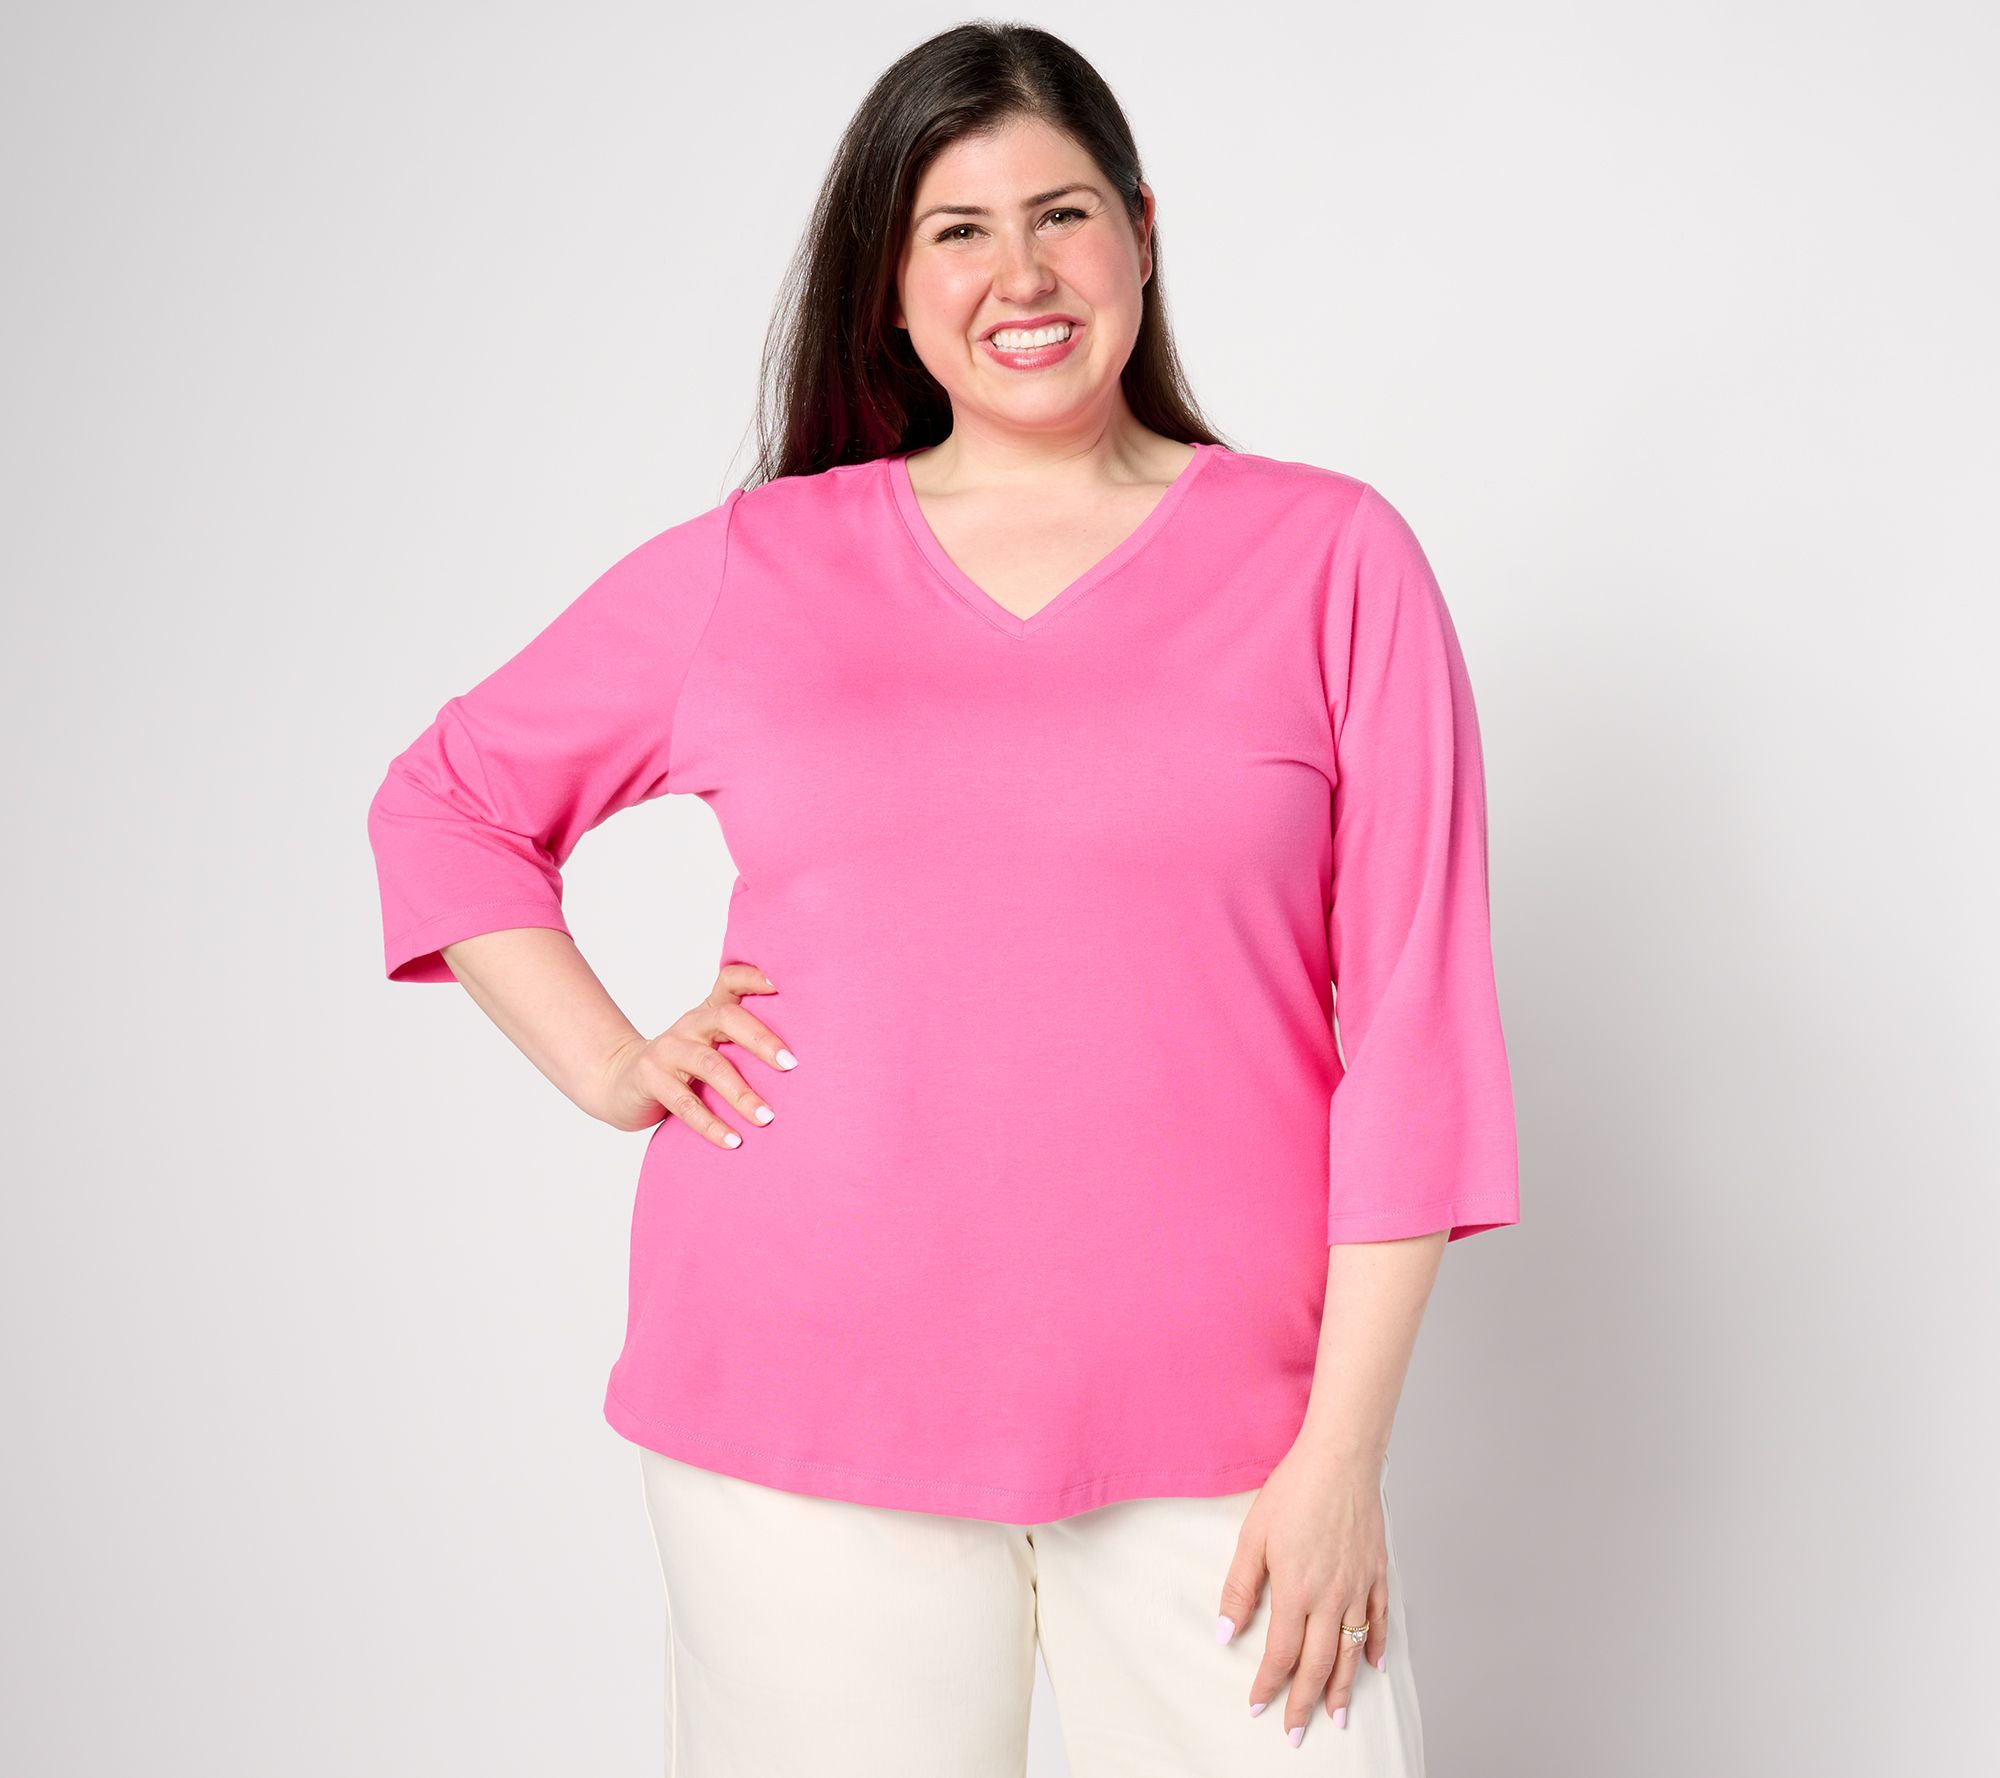 Plus Size Pink Capris & Crops for Women - JCPenney